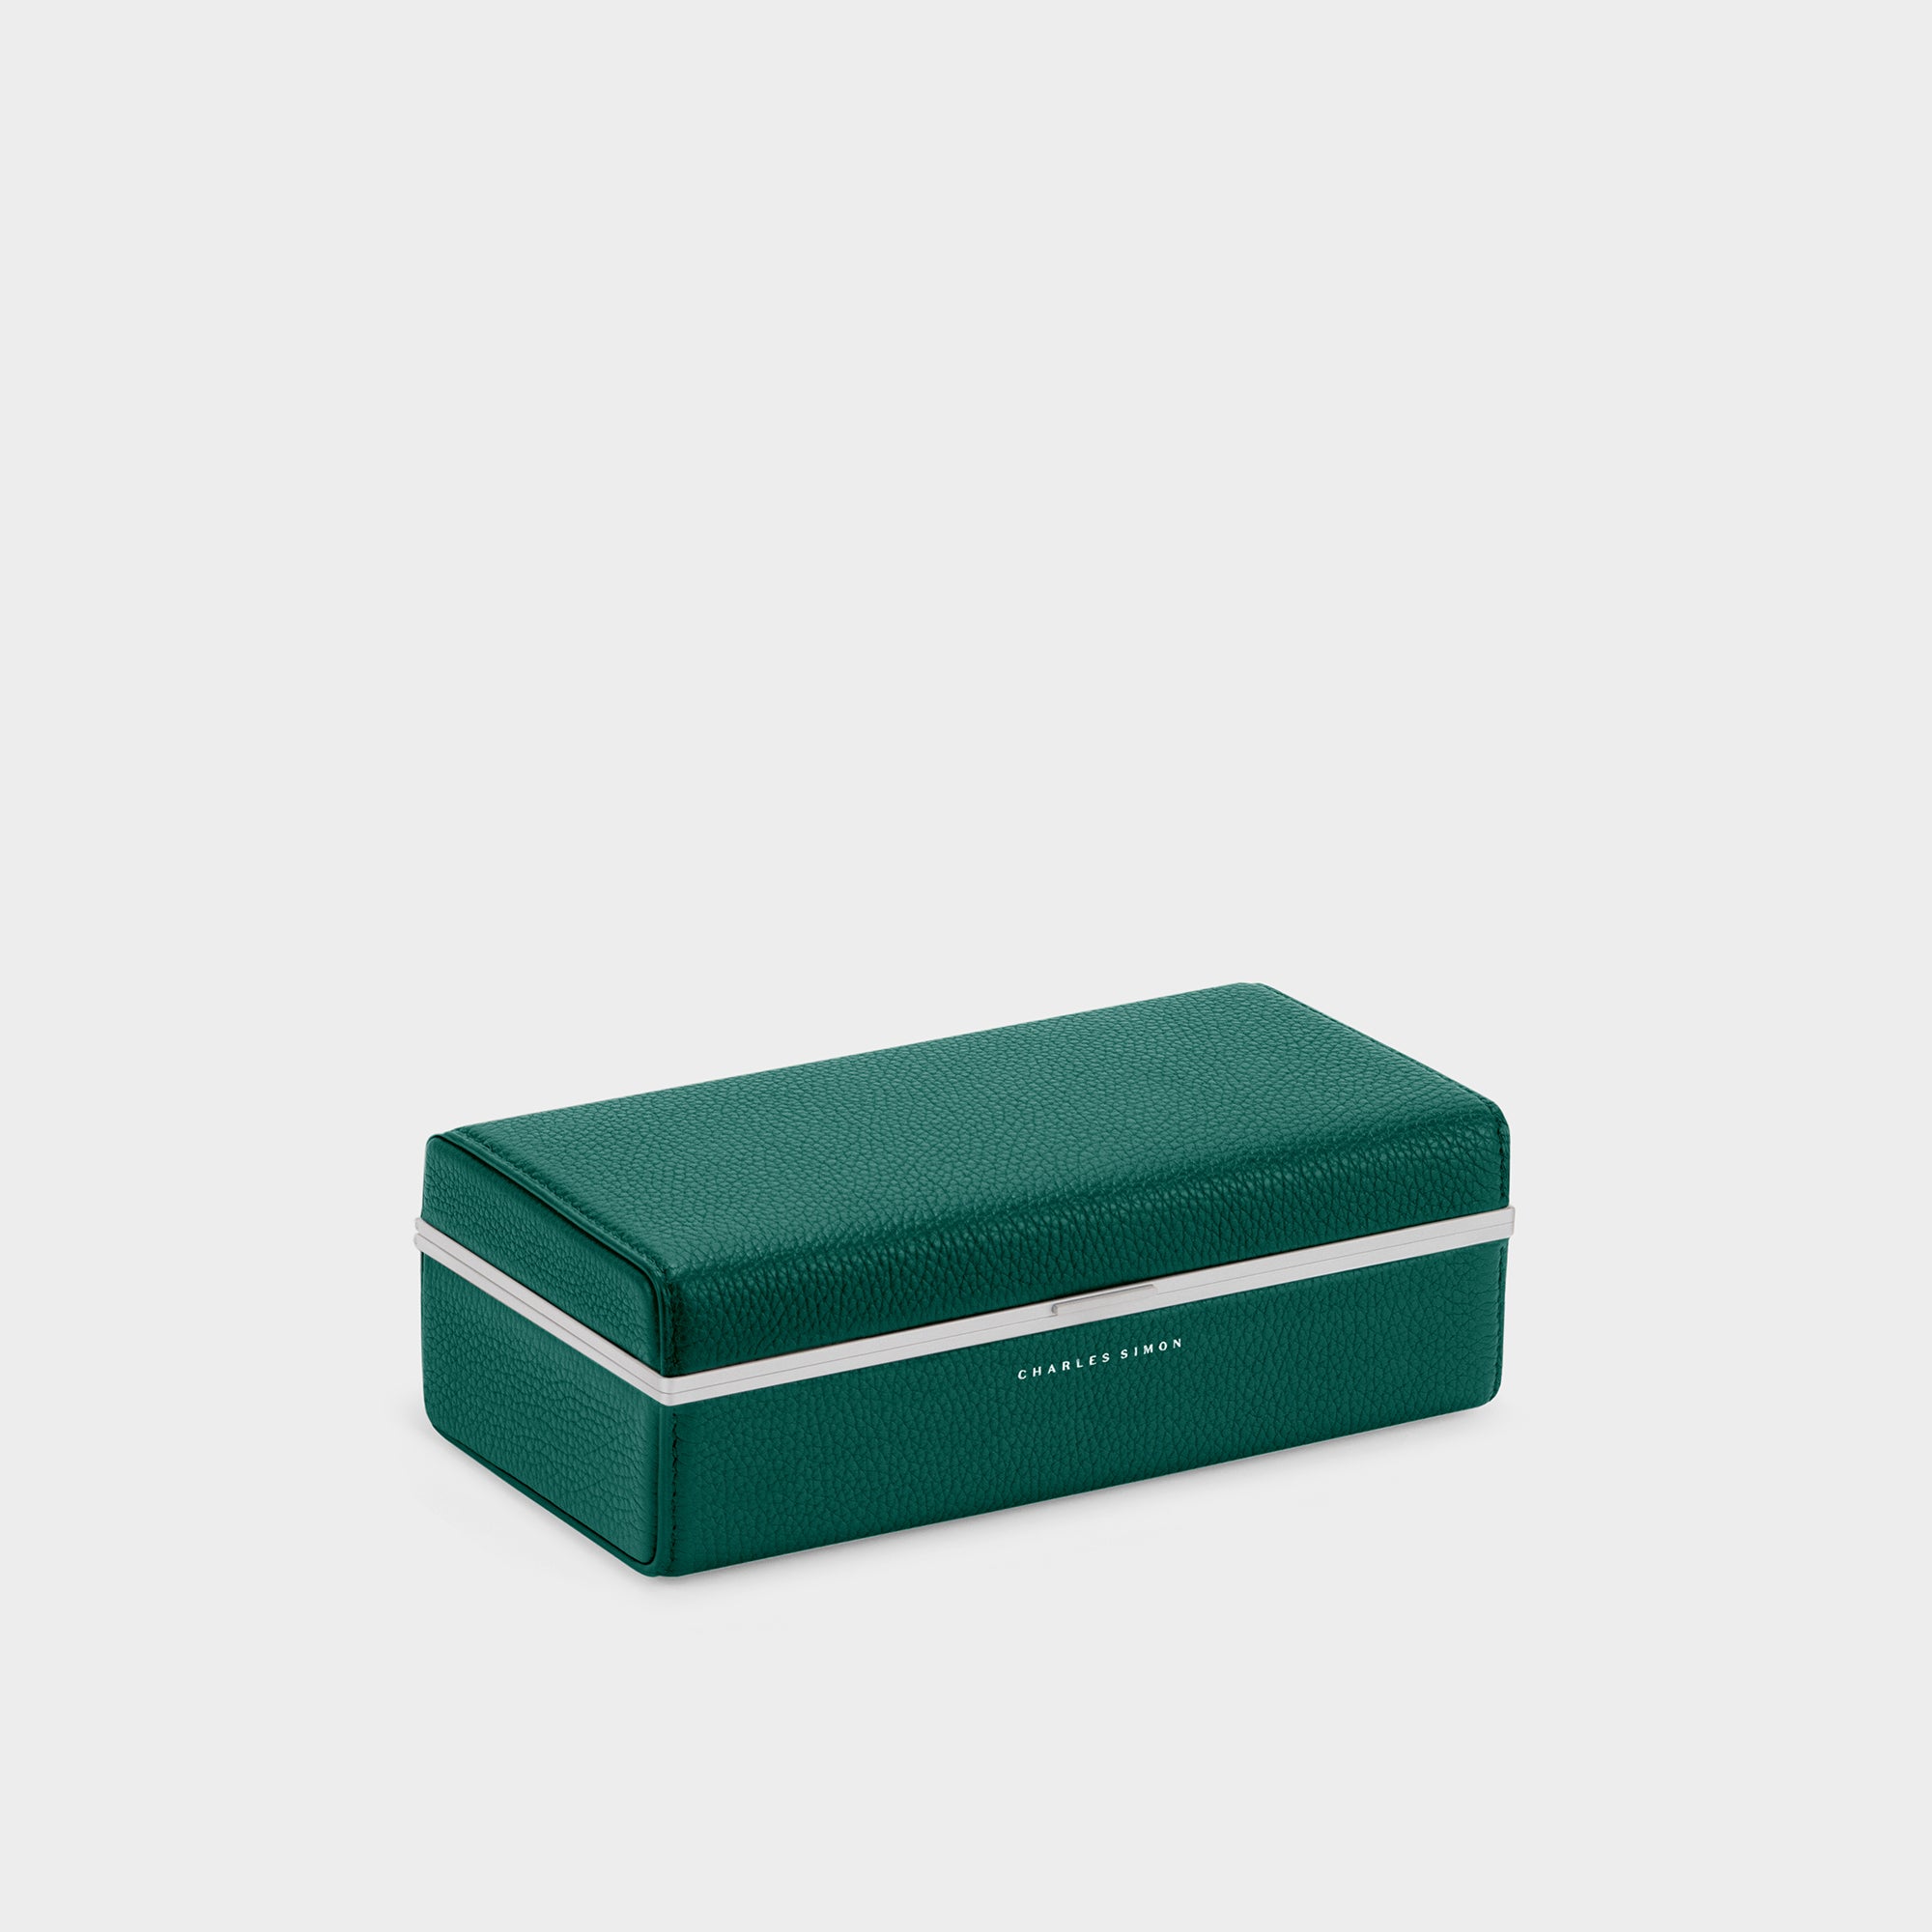 Charles Simon leather watch case in emerald